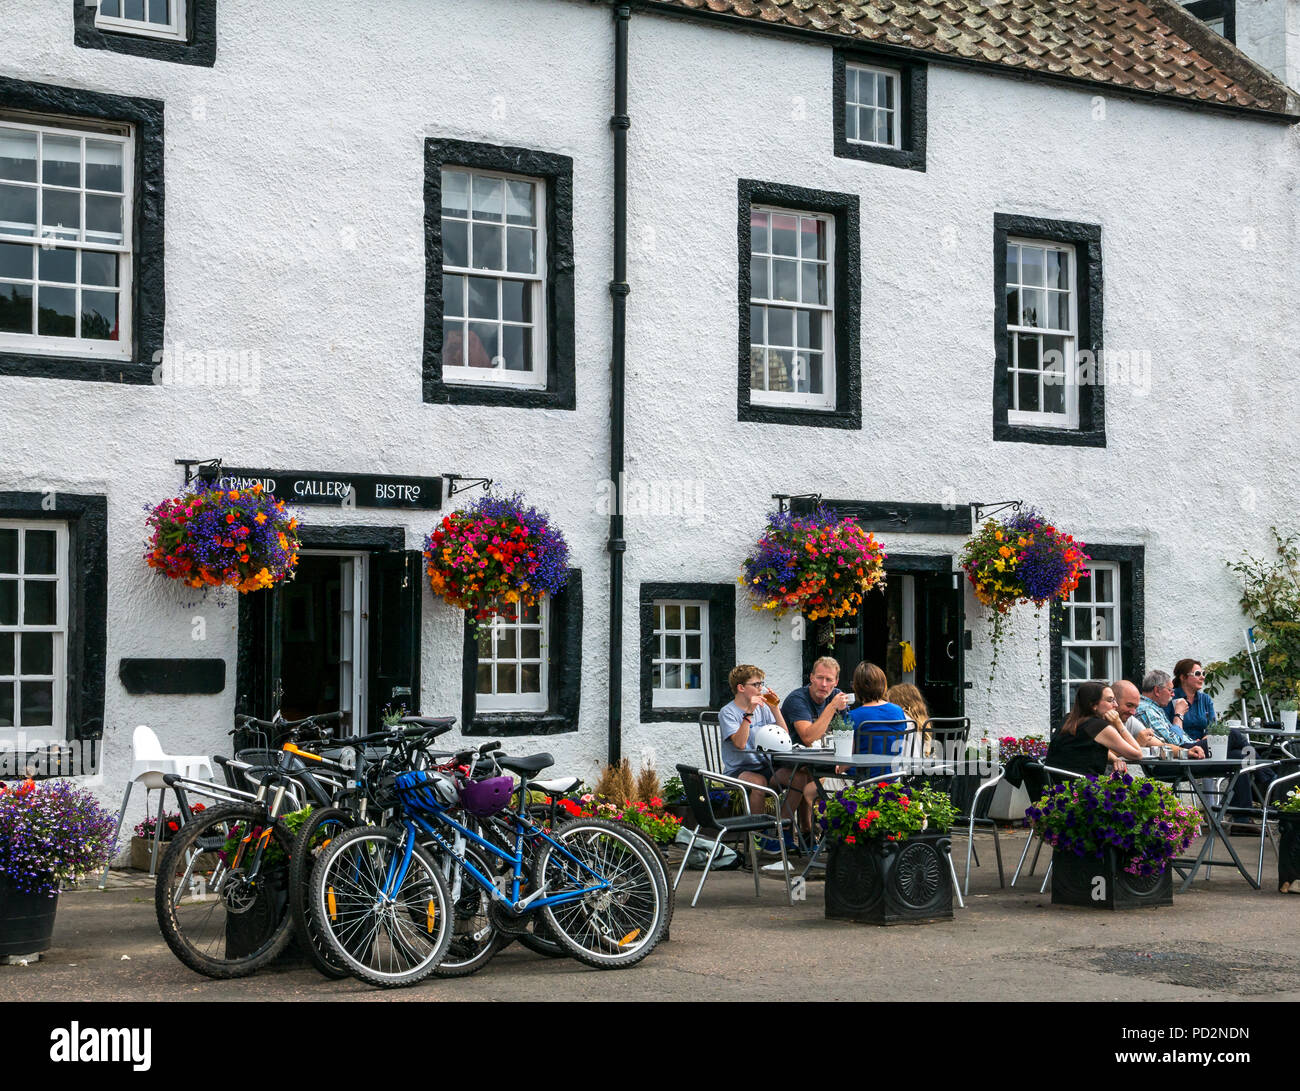 People sitting at outdoor tables with parked bicycles, Cramond Gallery Bistro, Cramond, Edinburgh, Scotland, UK with flower baskets in Summer Stock Photo